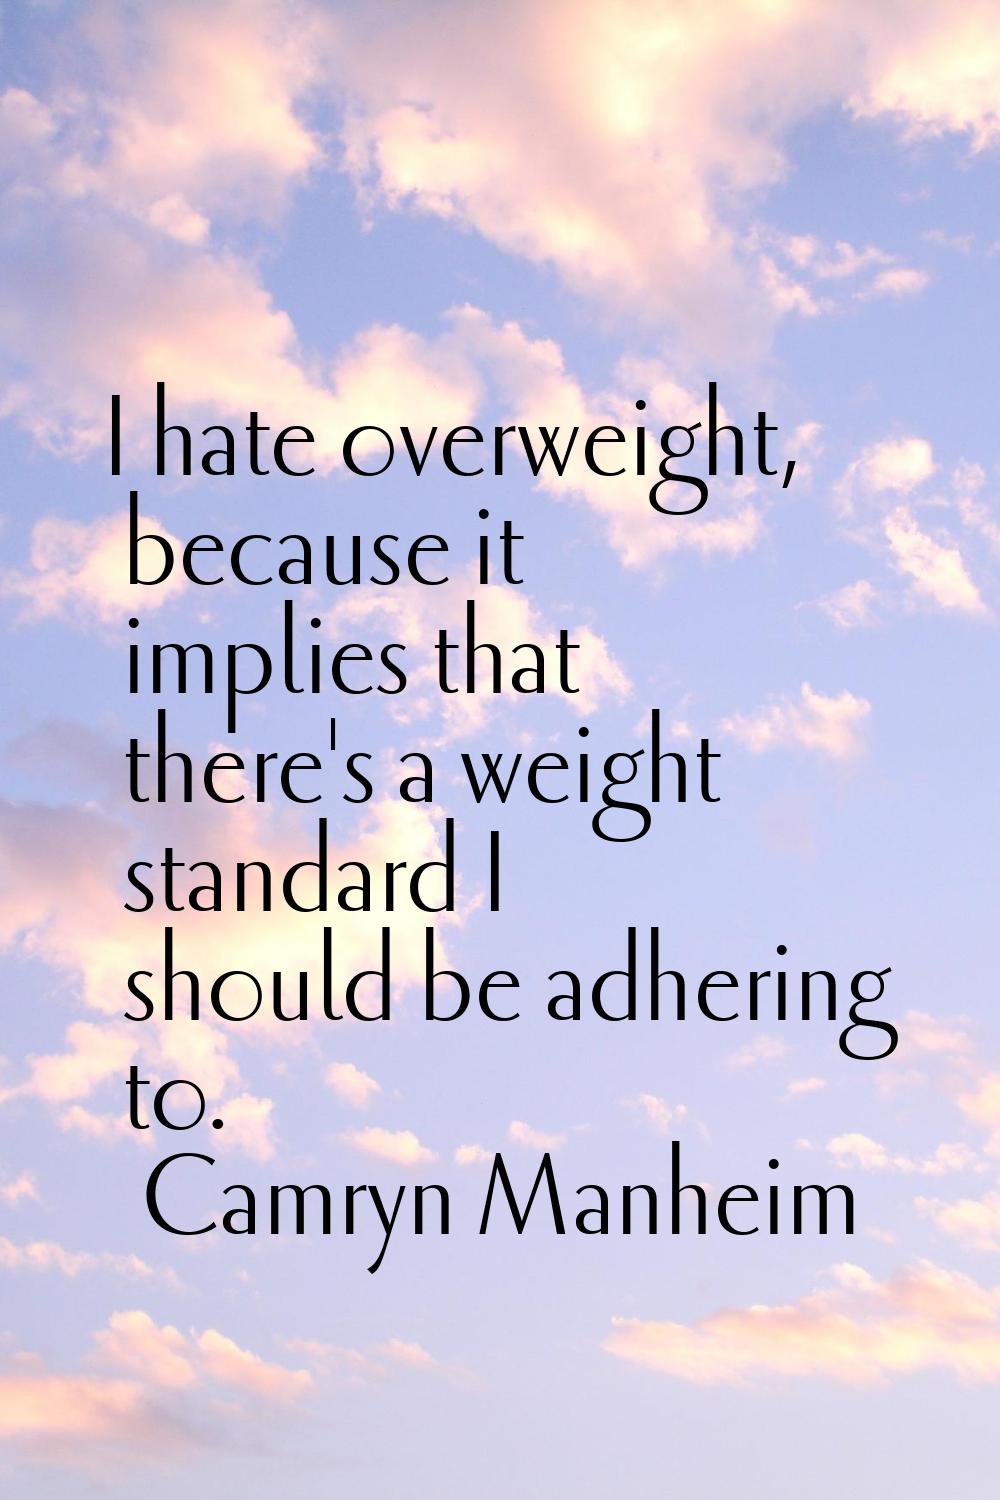 I hate overweight, because it implies that there's a weight standard I should be adhering to.